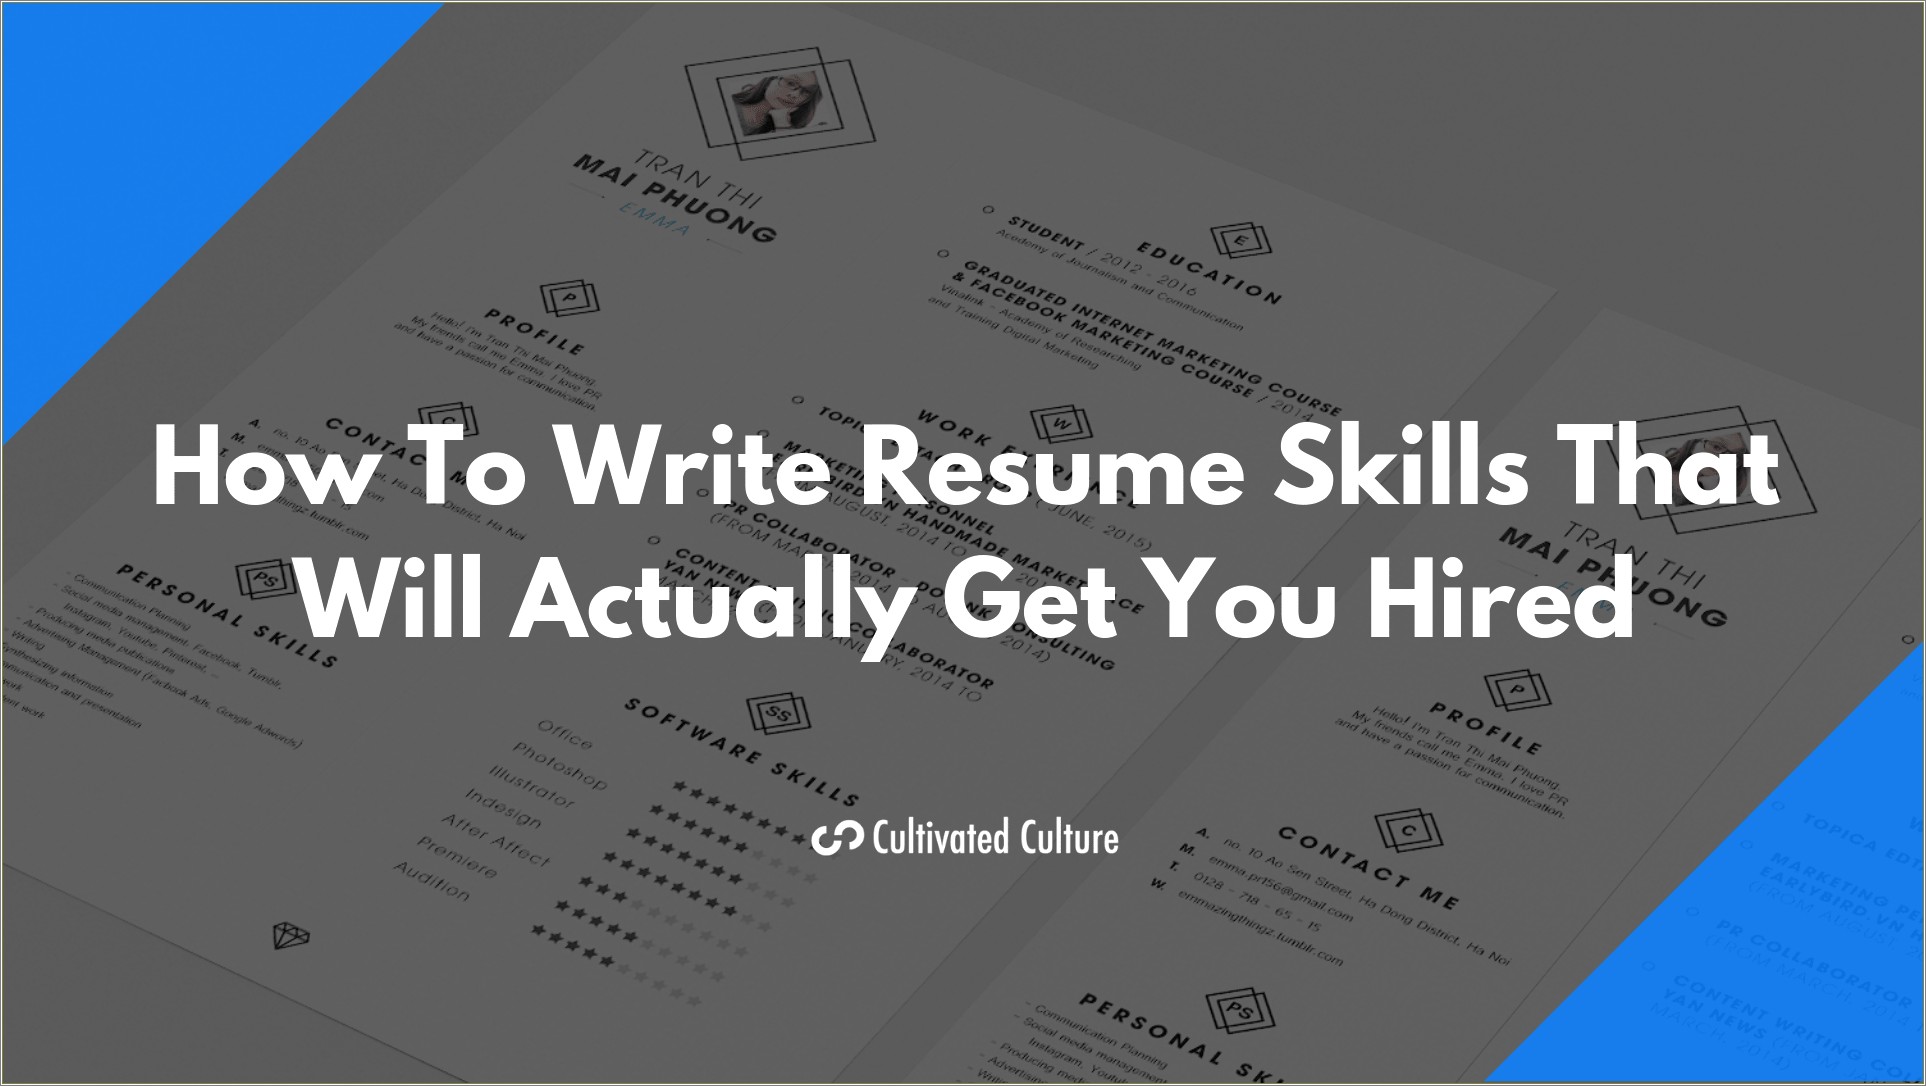 Good Things To Say On Resume For Skills